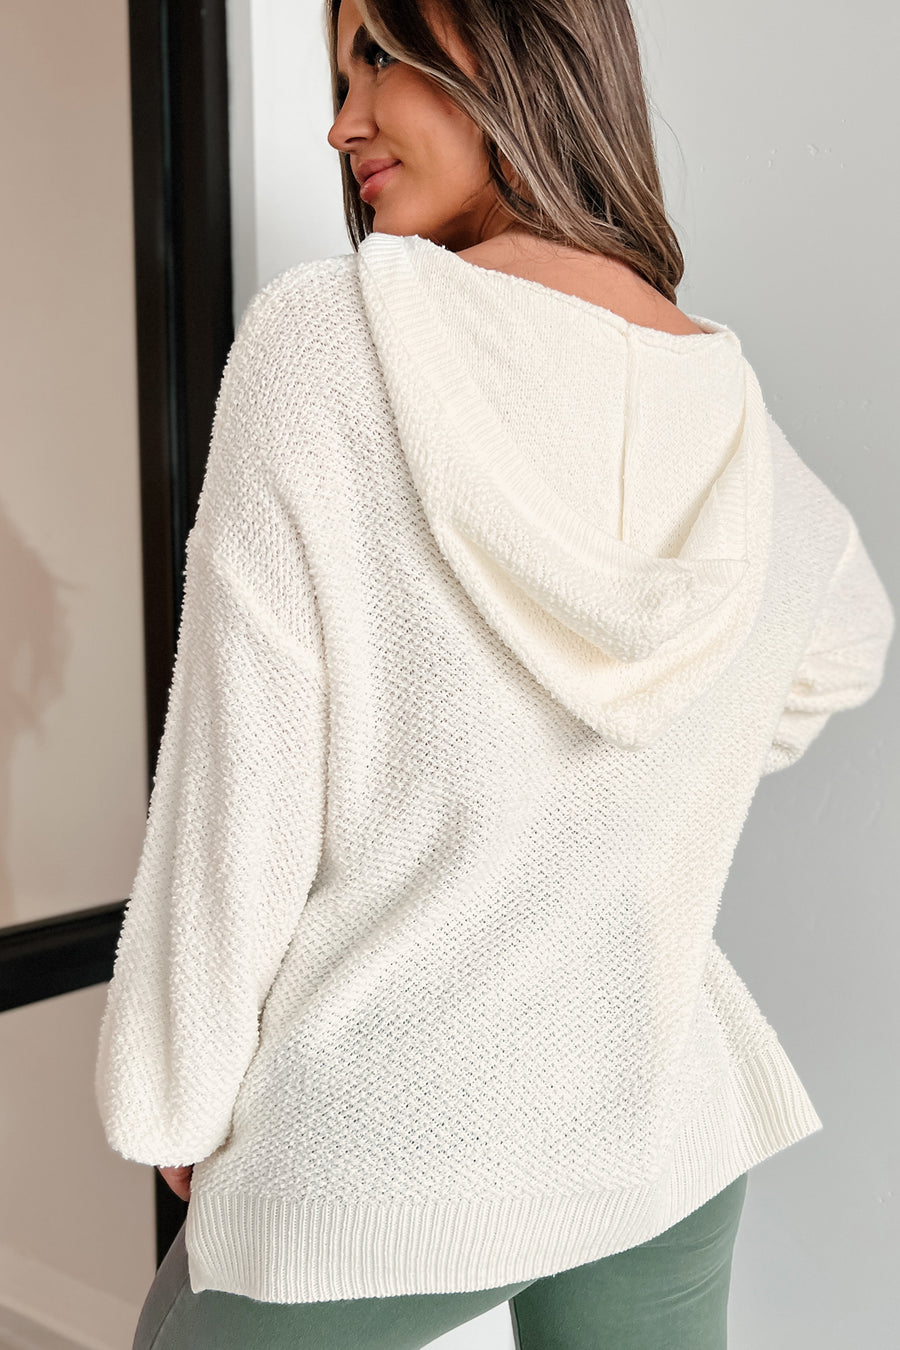 Sincerely Snuggly Hooded Popcorn Texture Sweater (Ivory) - NanaMacs